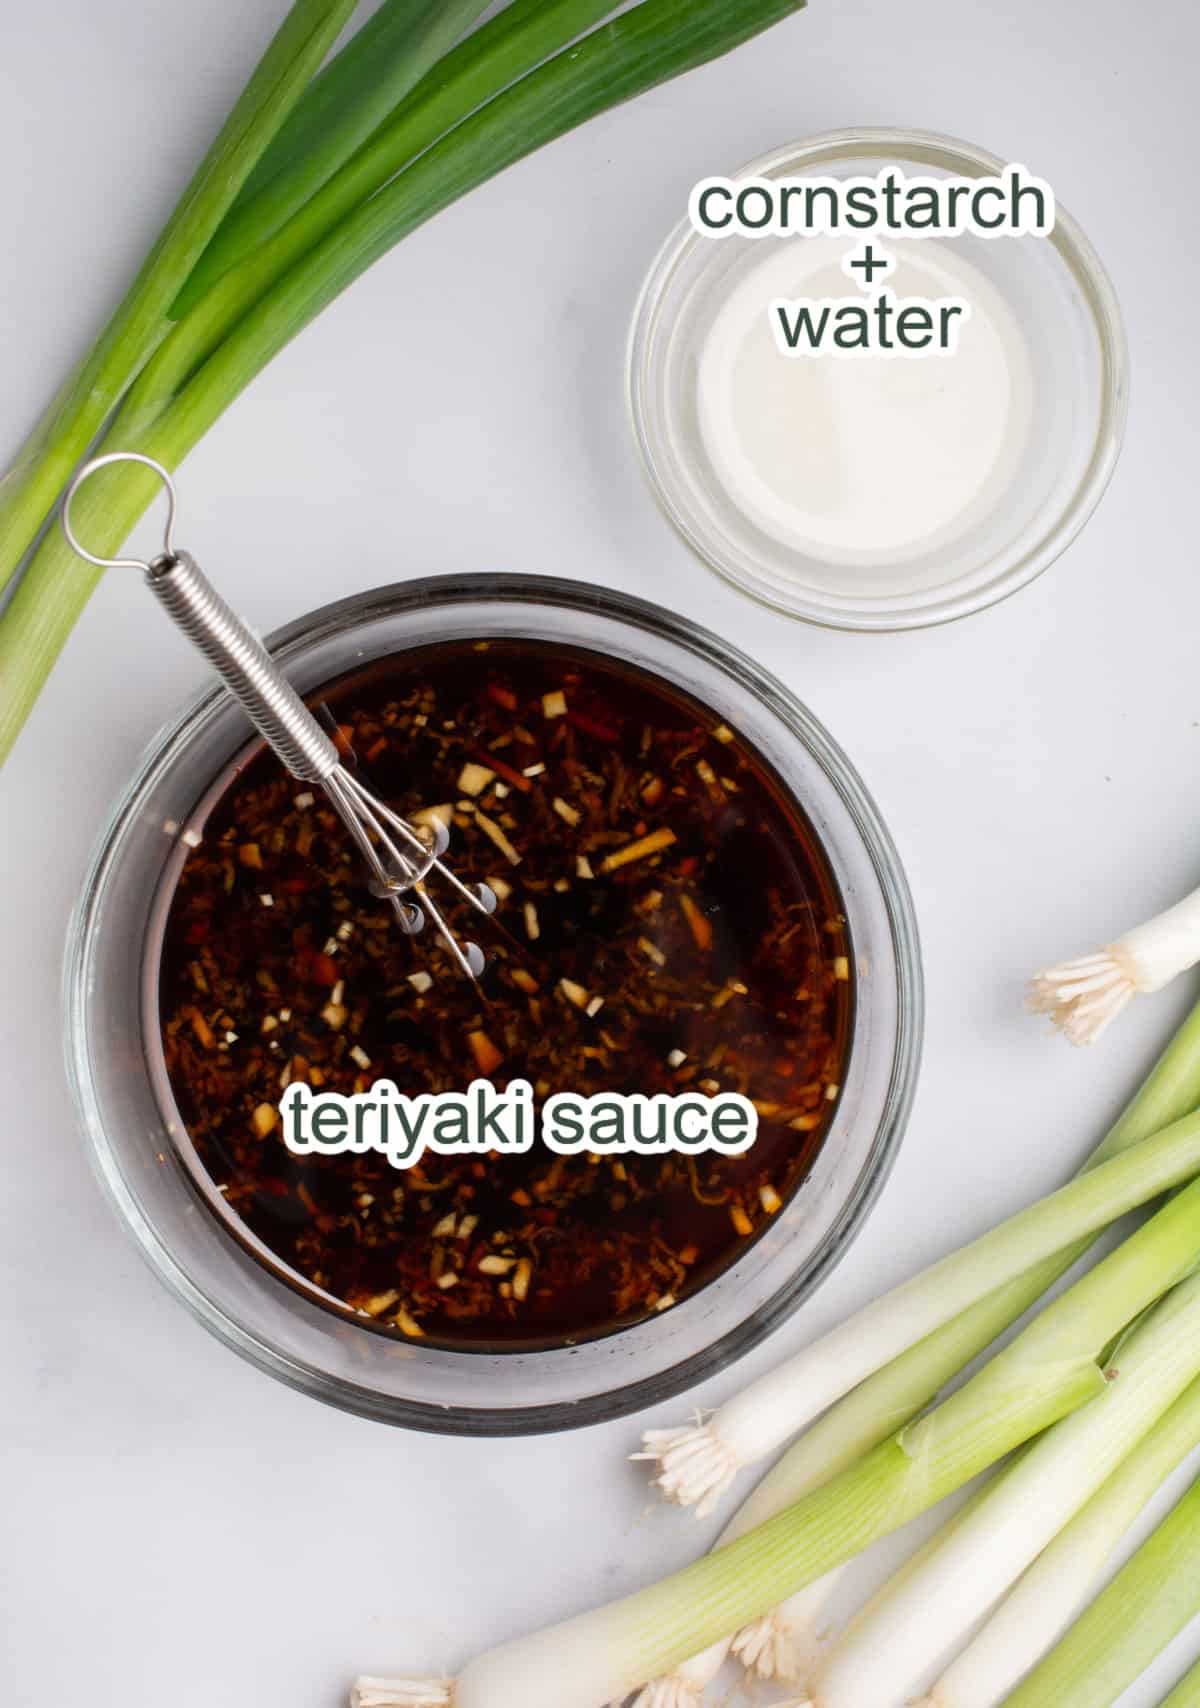 A glass bowl of homemade teriyaki sauce with fresh ginger and garlic and a bowl of water and cornstarch mixed.